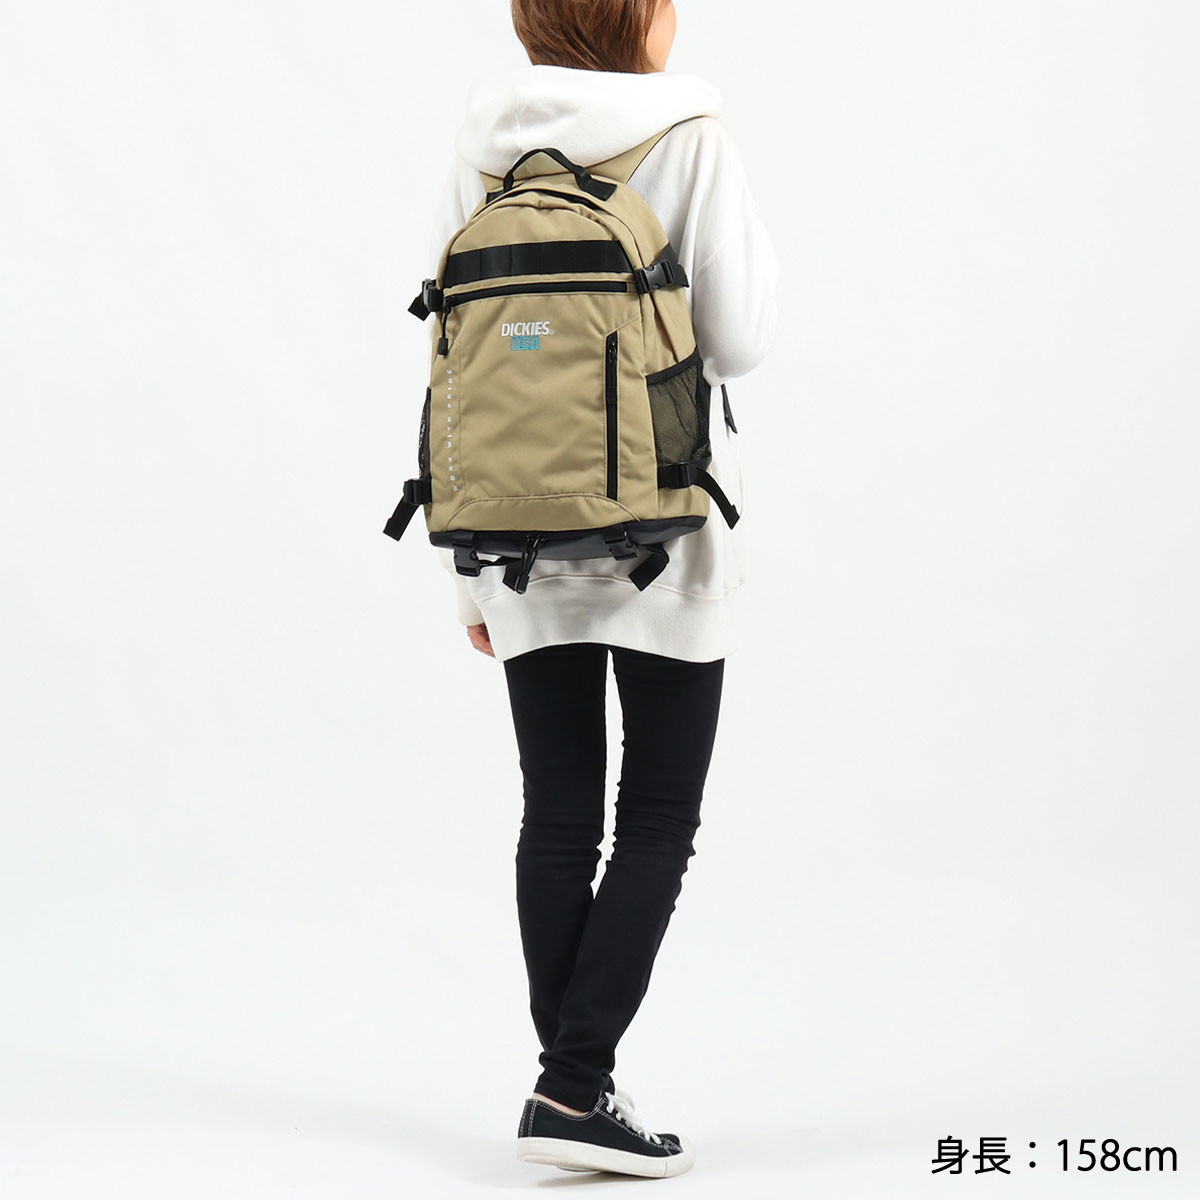 Dickies ディッキーズ USA EMB BACKPACK リュックサック 14738500 